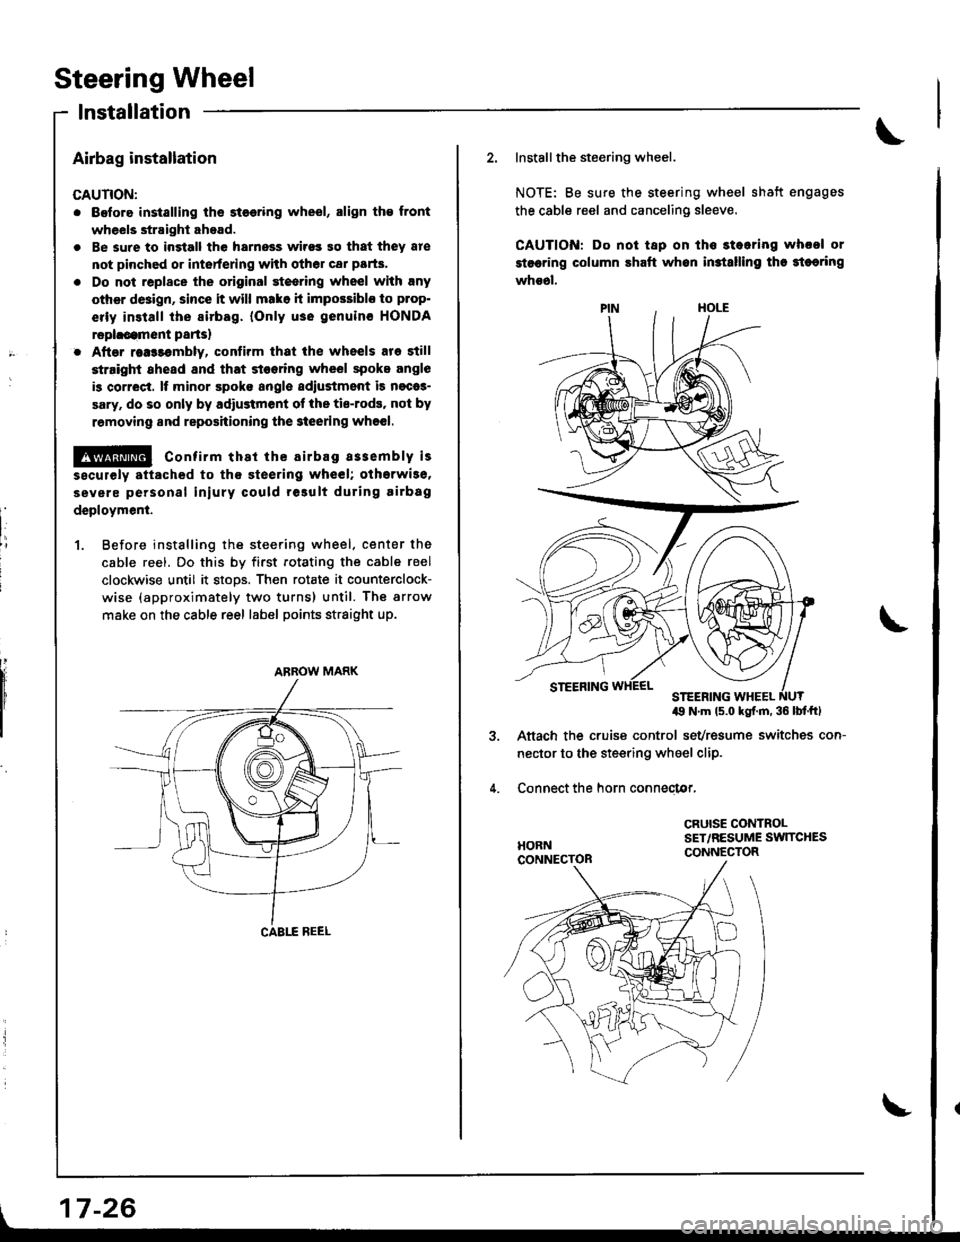 HONDA INTEGRA 1998 4.G Workshop Manual Steering Wheel
lnstallation
Airbag installation
CAUTION:
. Before installing ths st€€ring wheel, align th€ front
wheels straight ahead.
. Be sure to ingtall the harnoss wirss 90 that they 8re
no